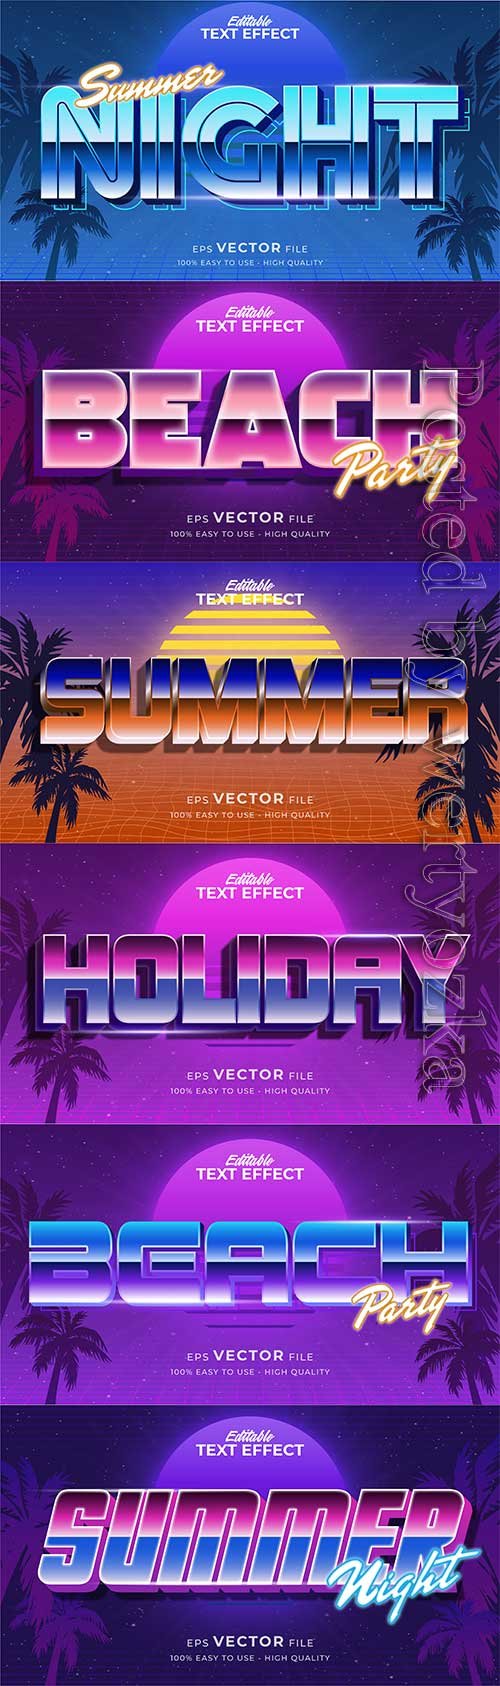 Retro summer holiday text in grunge style theme in vector vol 15